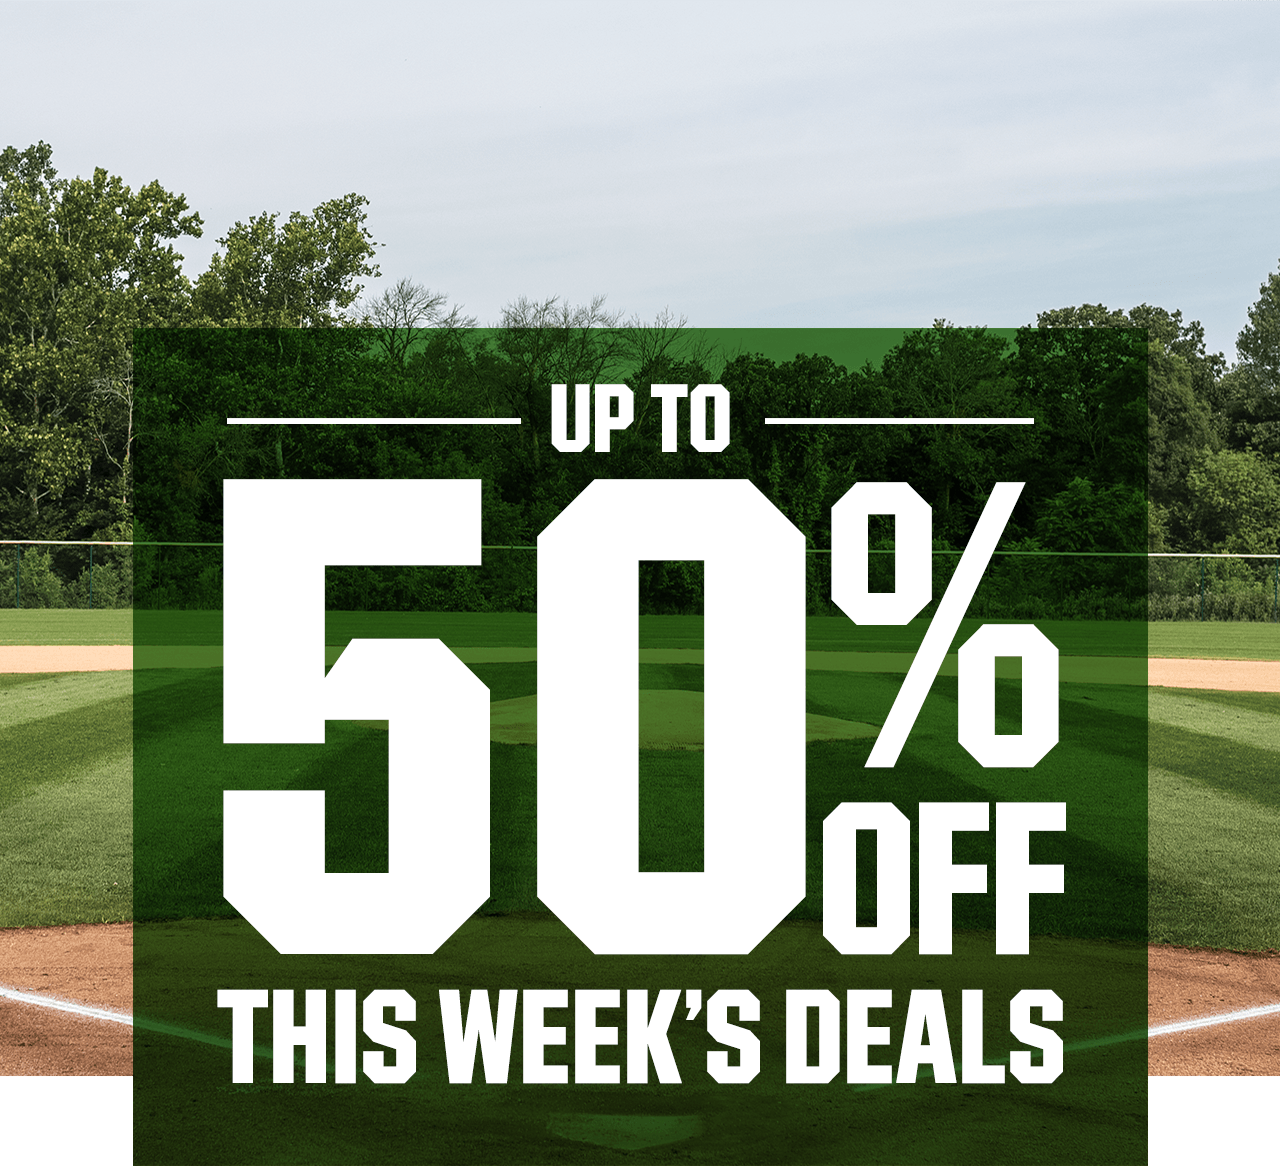 Up to 50% off. This week's deals.